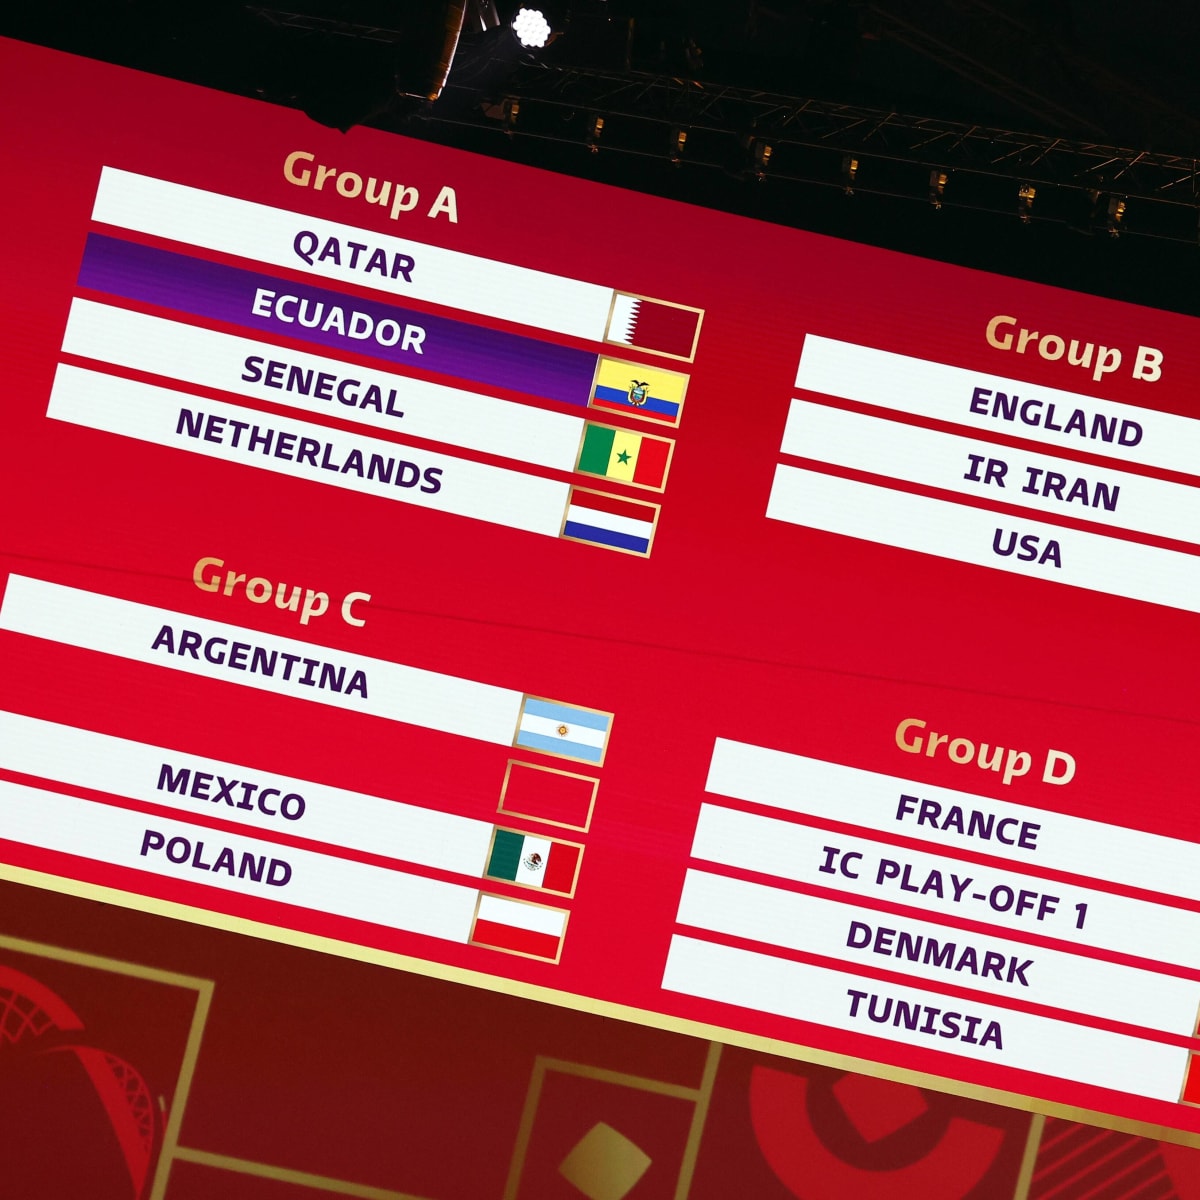 World Cup 2022: When is the draw for the Qatar 2022 World Cup